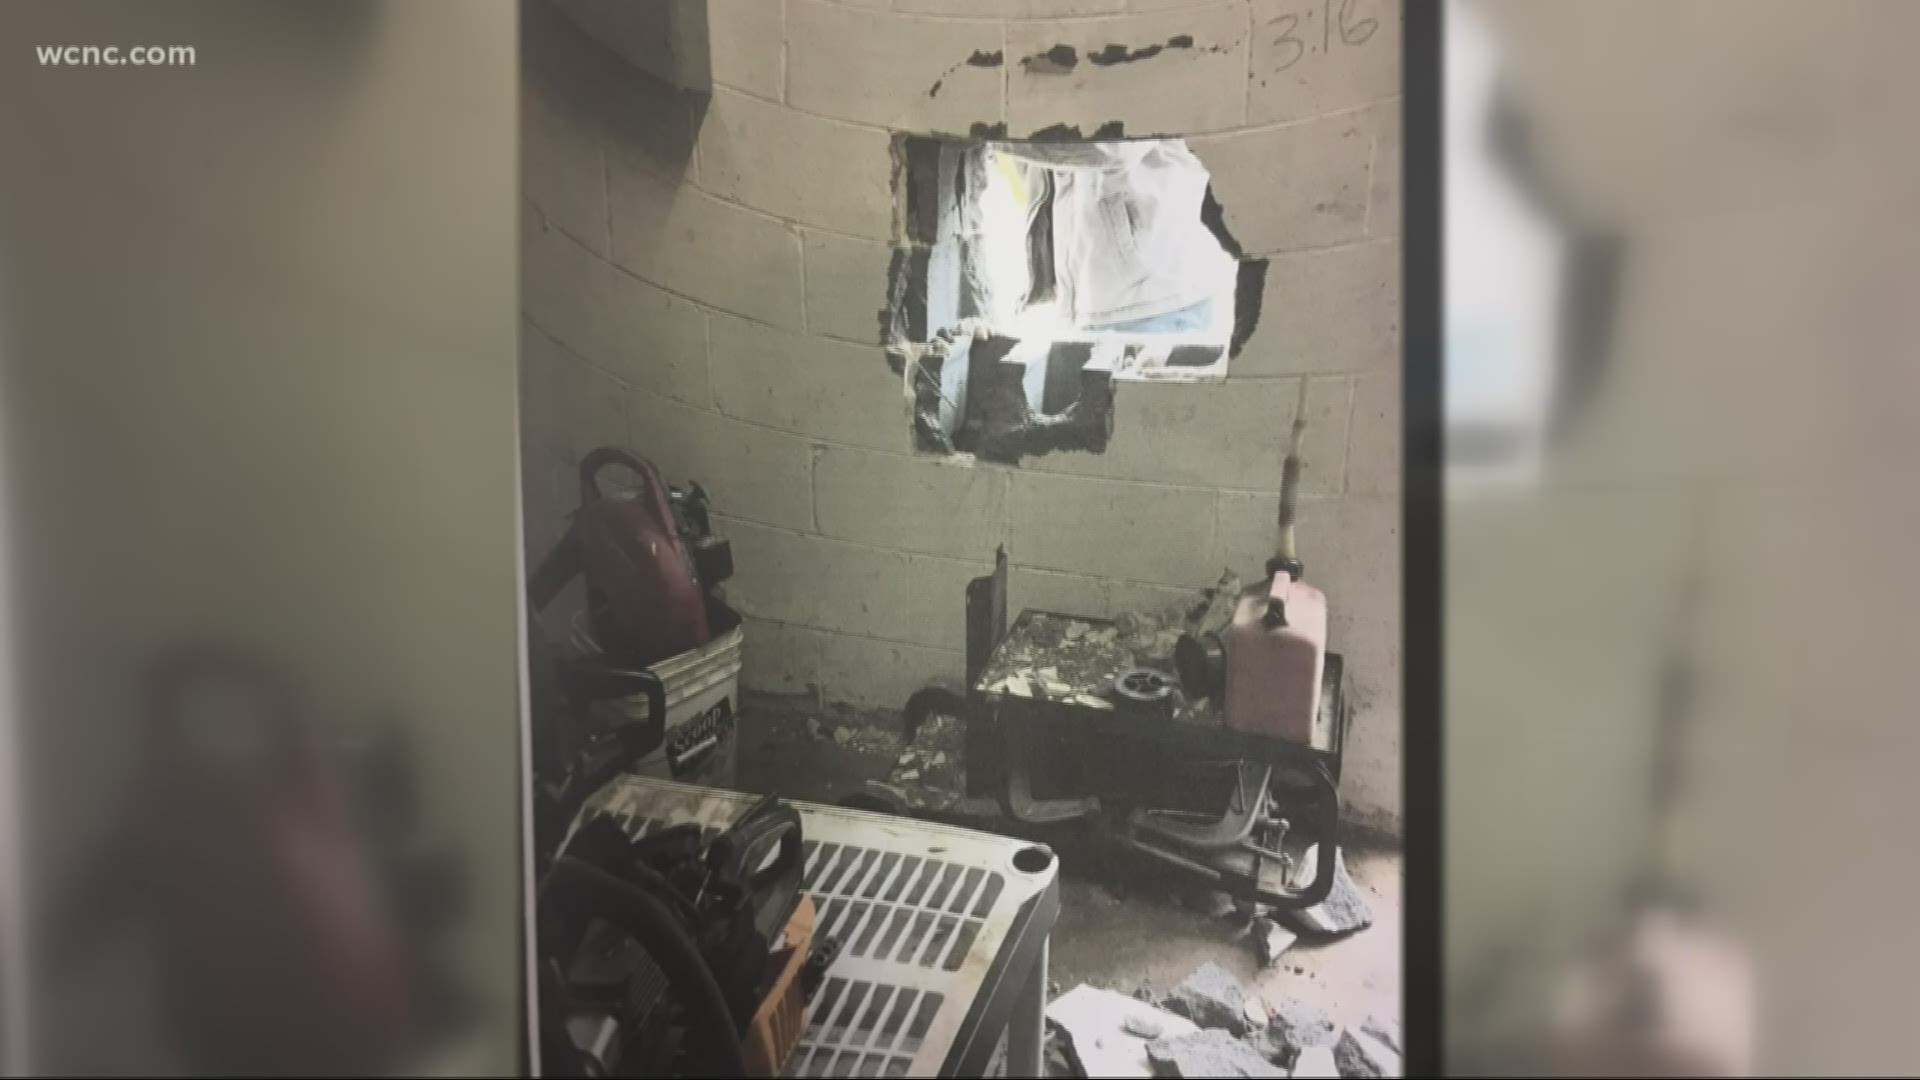 Police said the thief hammered through concrete and carved into a safe with a saw to steal thousands of dollars in merchandise.